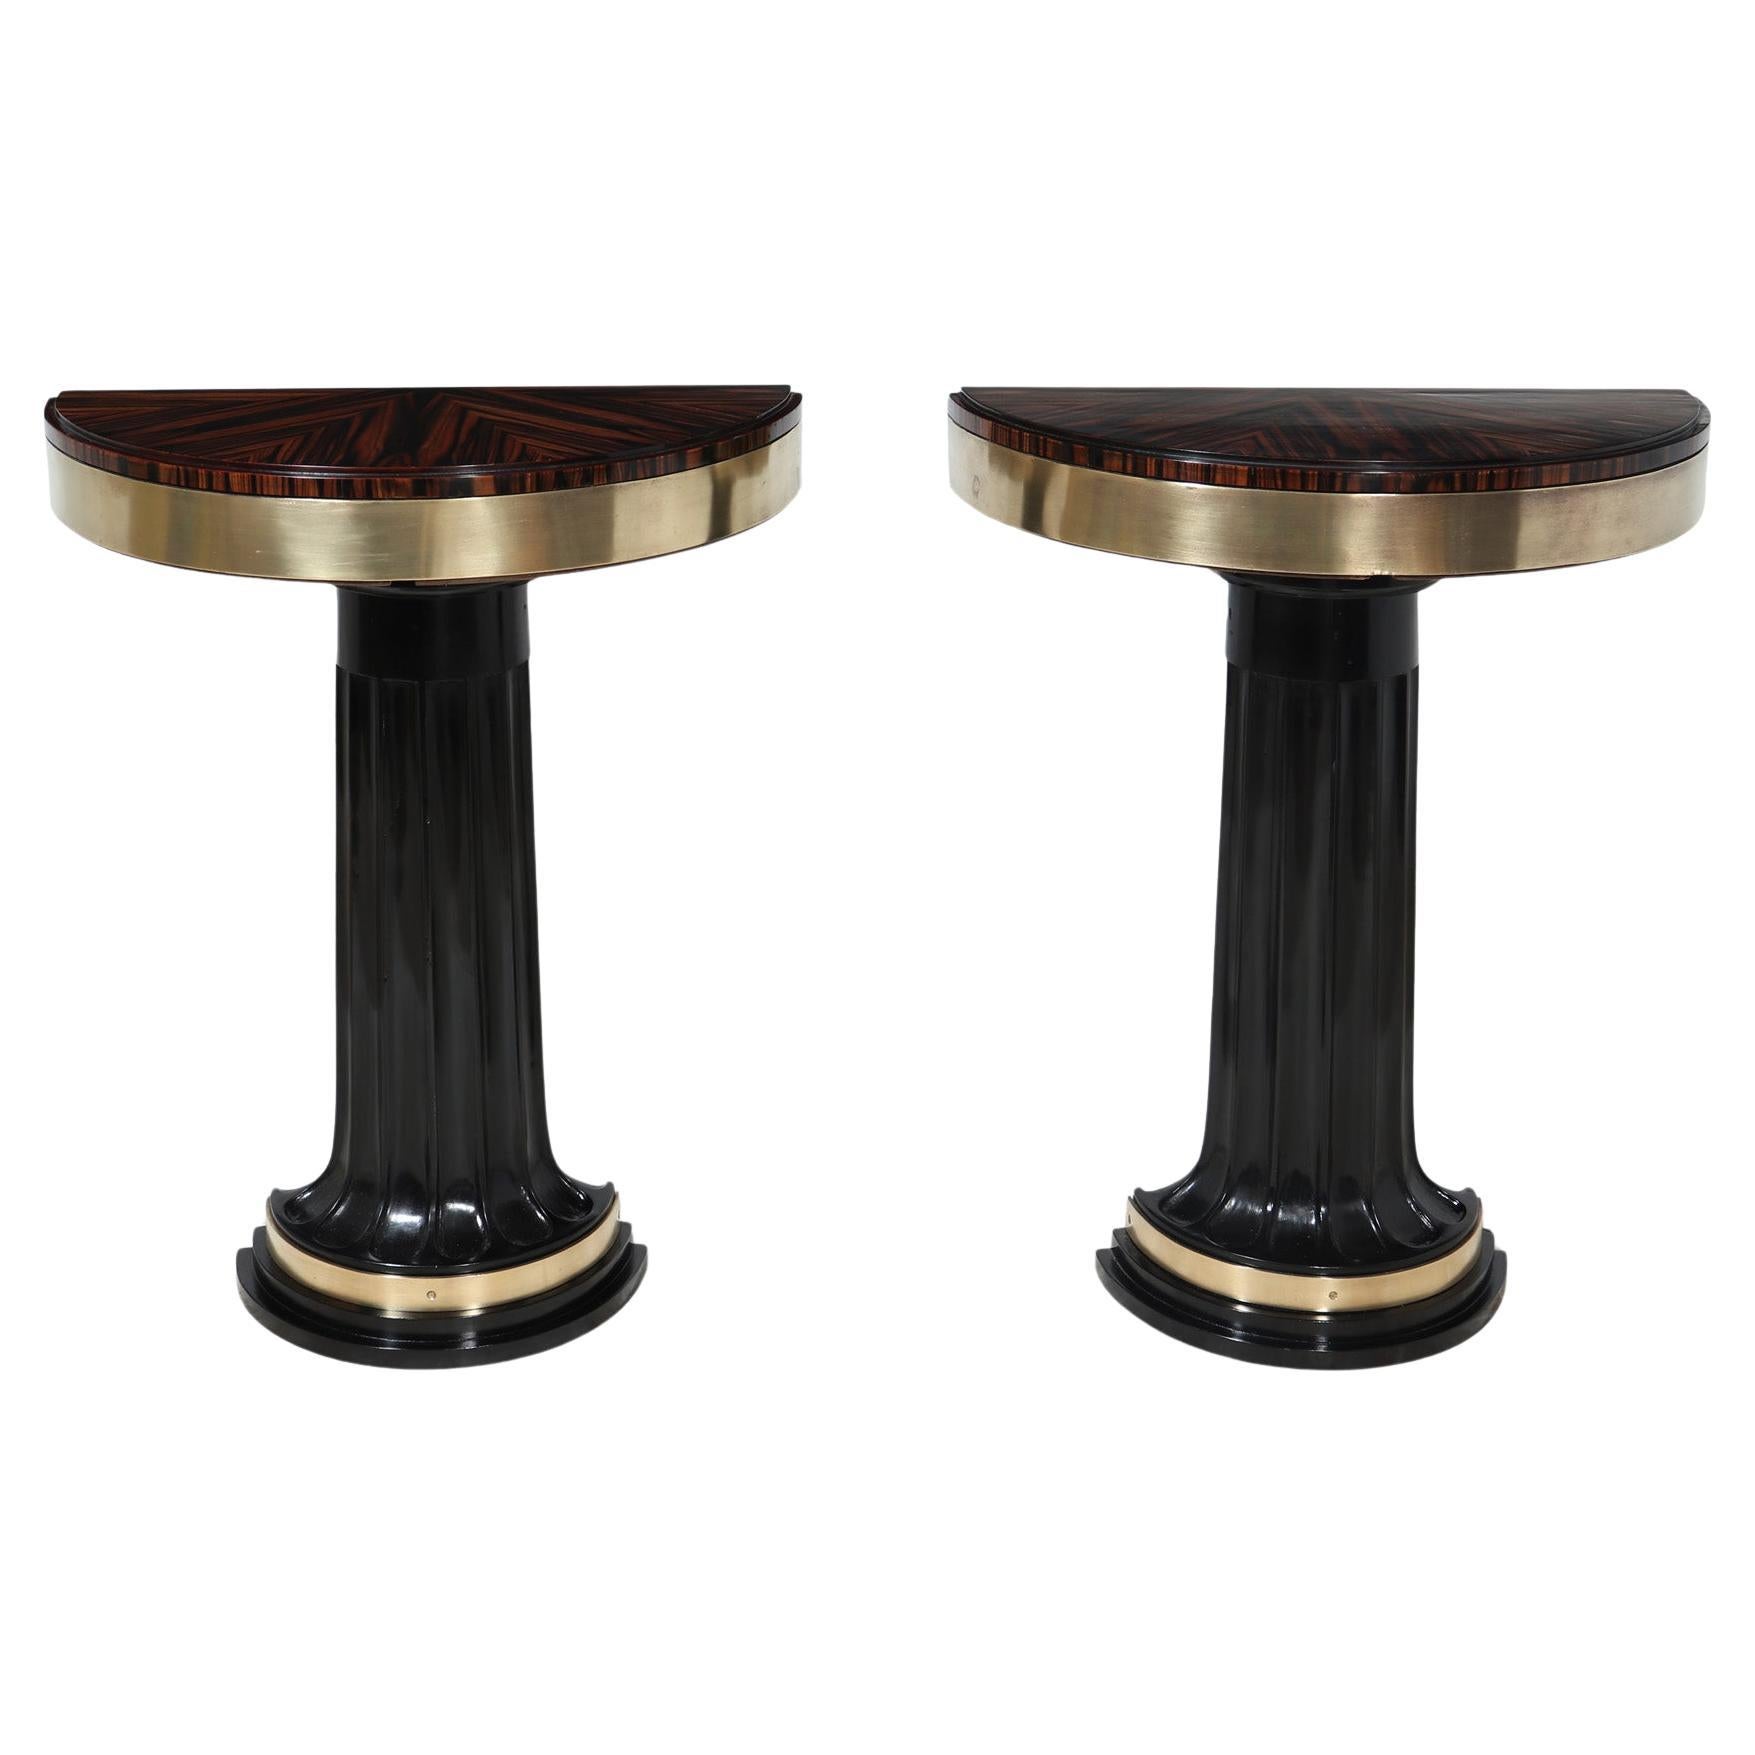 Pair of Italian Art Deco Console Tables in Macassar Ebony For Sale